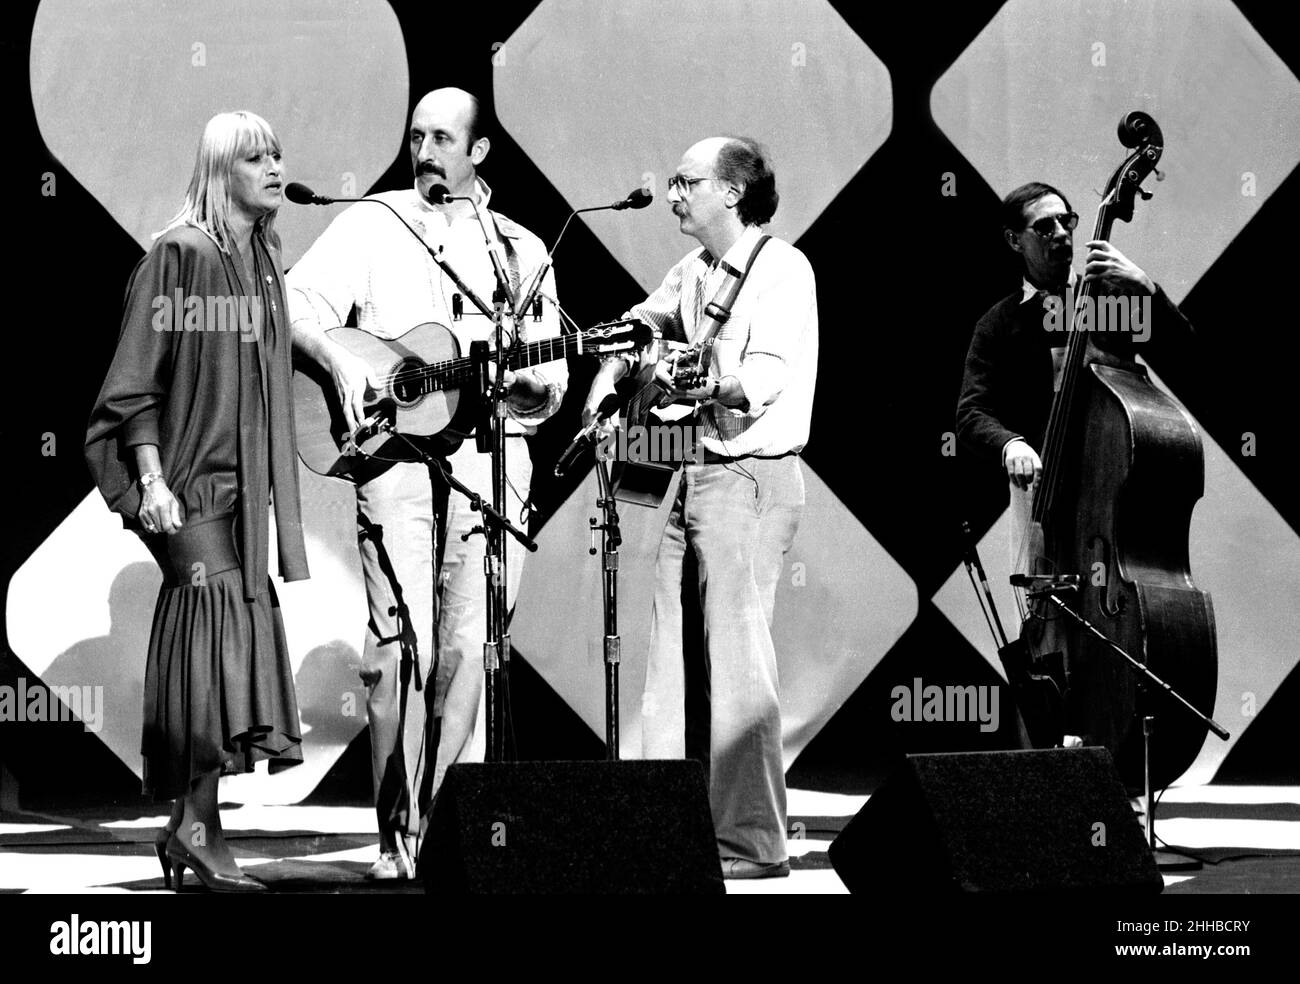 Peter, Paul & Mary (Mary Travers, Paul Stookey und Peter Yarrow), die Ende 1970s in der TV-Show „Solid Gold“ auftrat.Credit: Ron Wolfson / Rock Negatives / MediaPunch Stockfoto